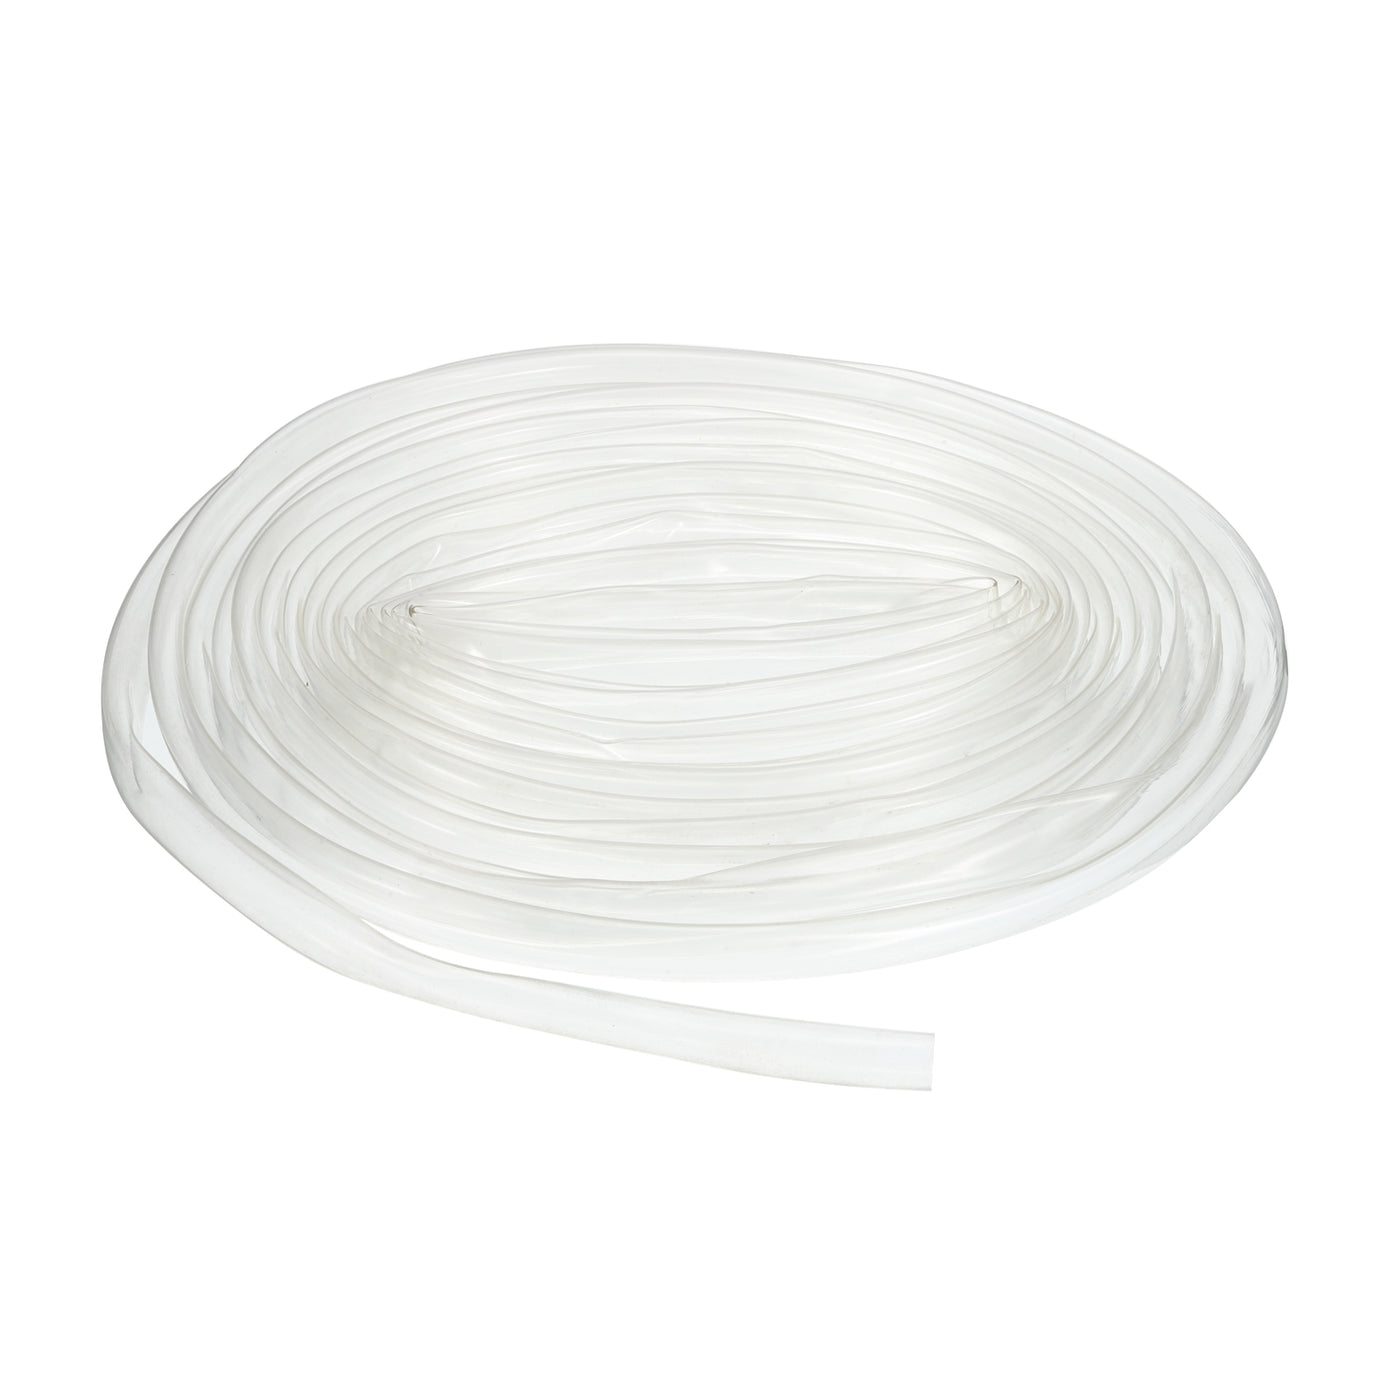 uxcell Uxcell Clear PVC Tube Wire Harness Tubing, 1/2-inch(12mm) ID 23ft Sleeve for Wire Sheathing Wire Protection